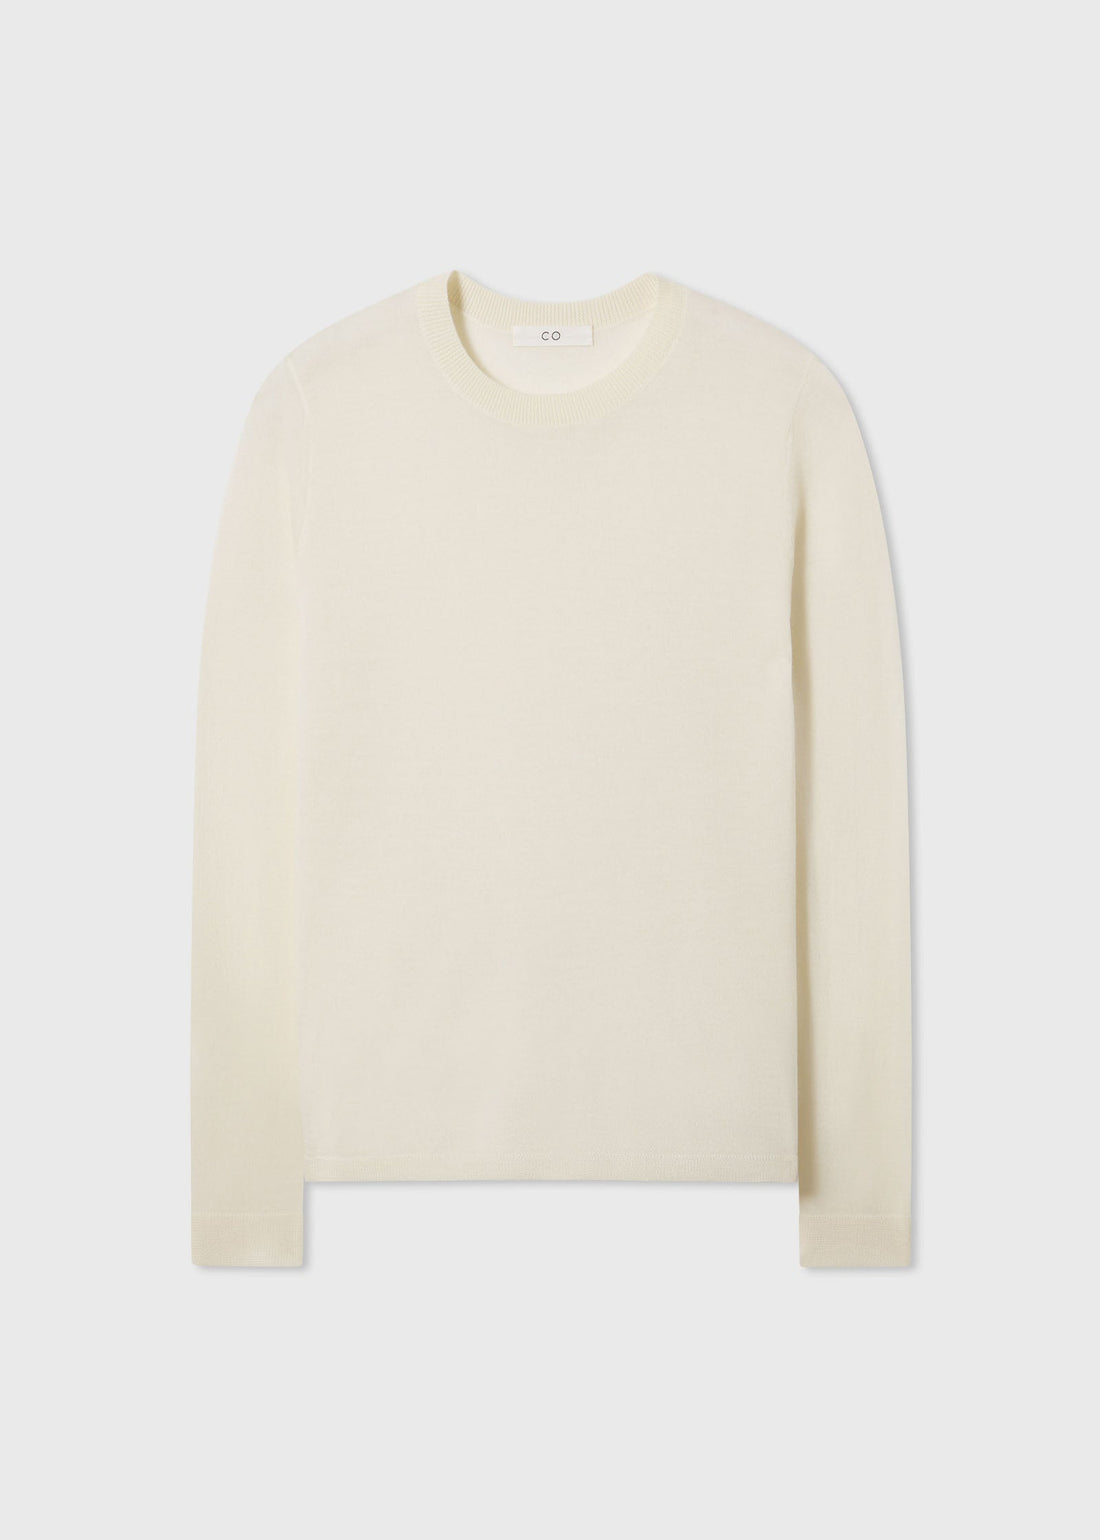 CO Long Sleeve Crew Sweater in Fine Cashmere